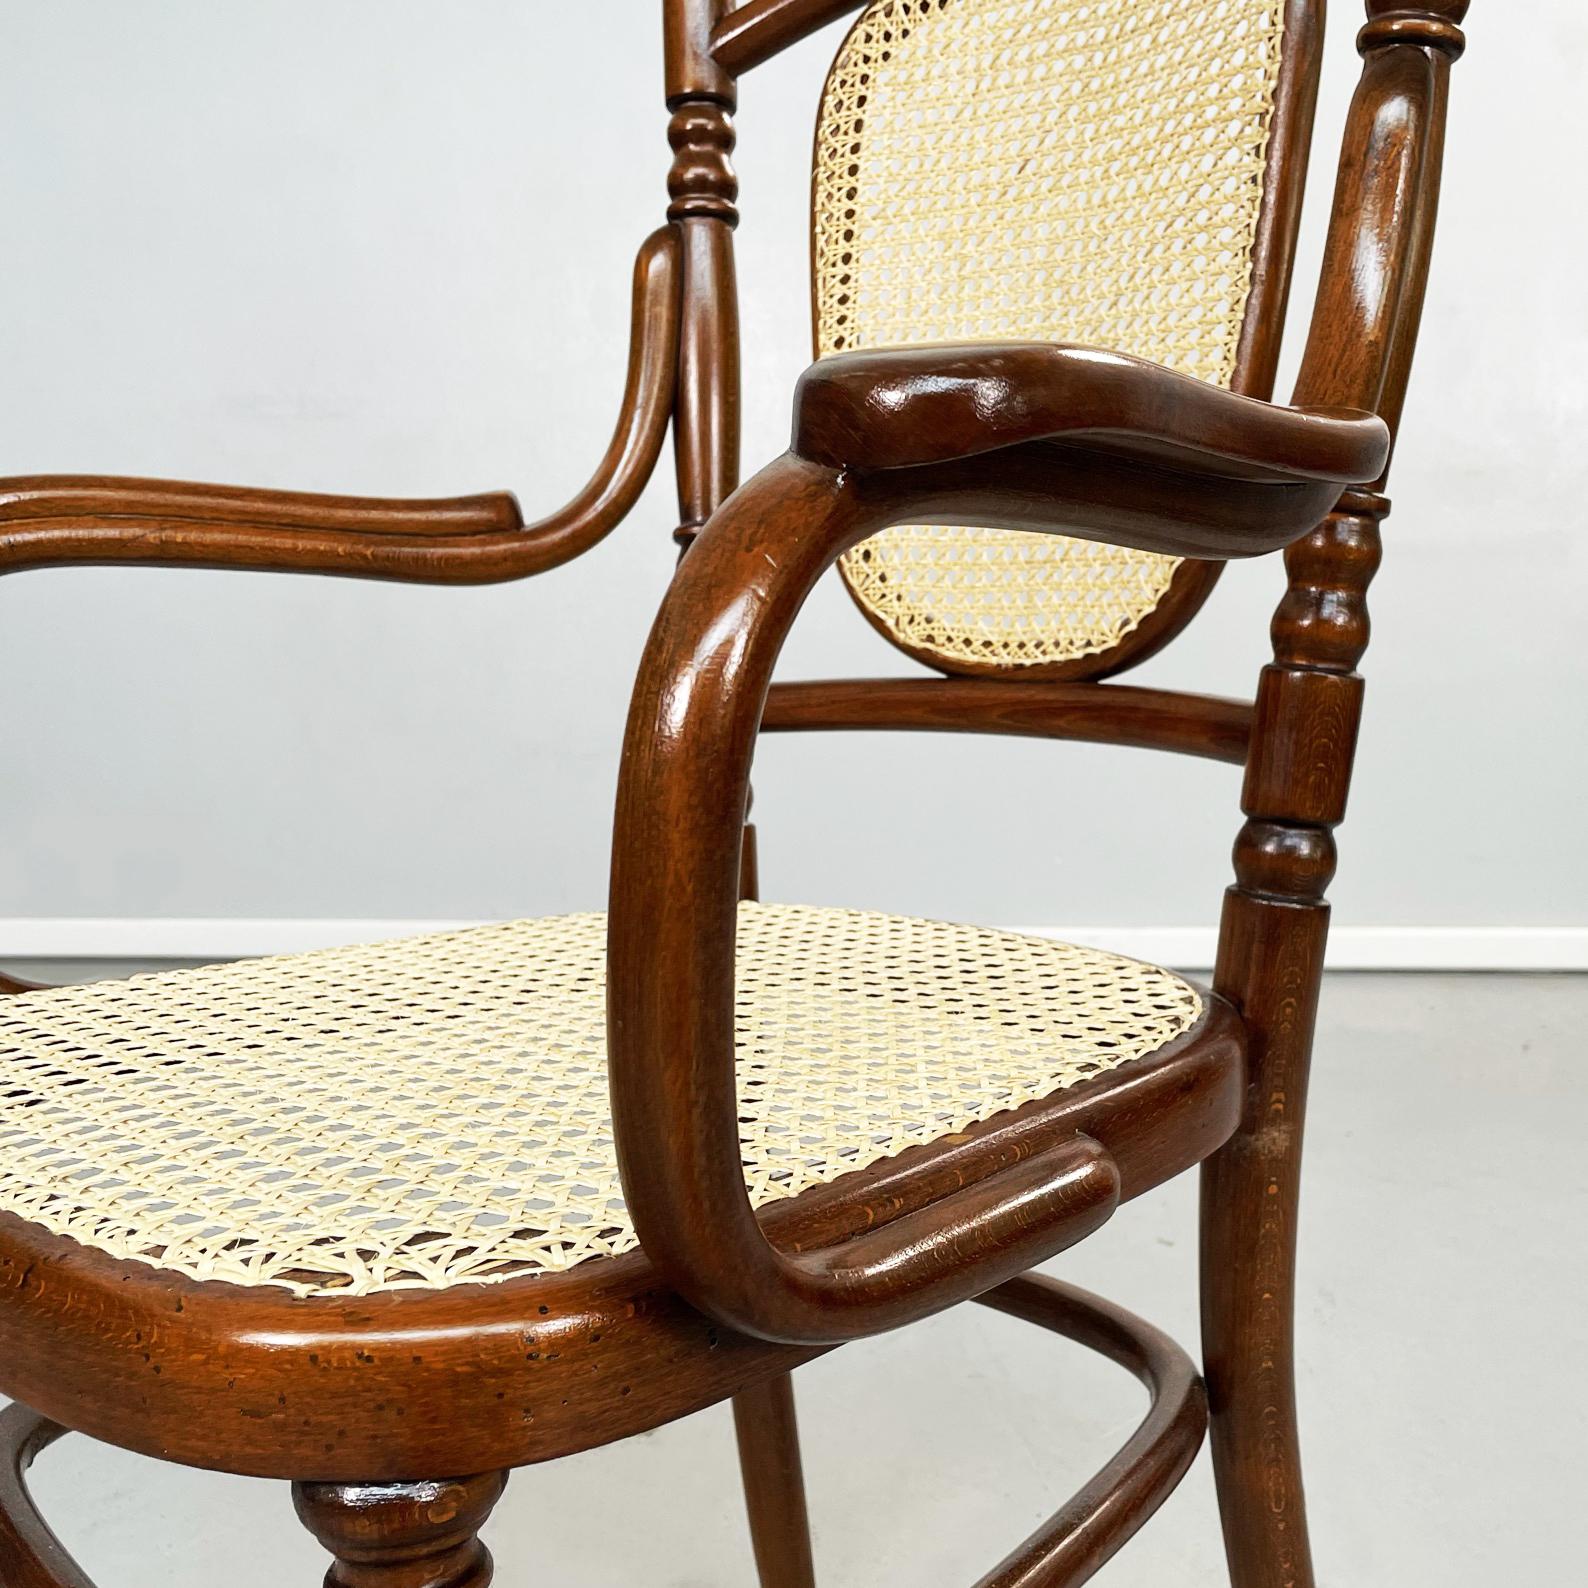 Austrian Chairs with Straw and Wood by Thonet, 1900s For Sale 4